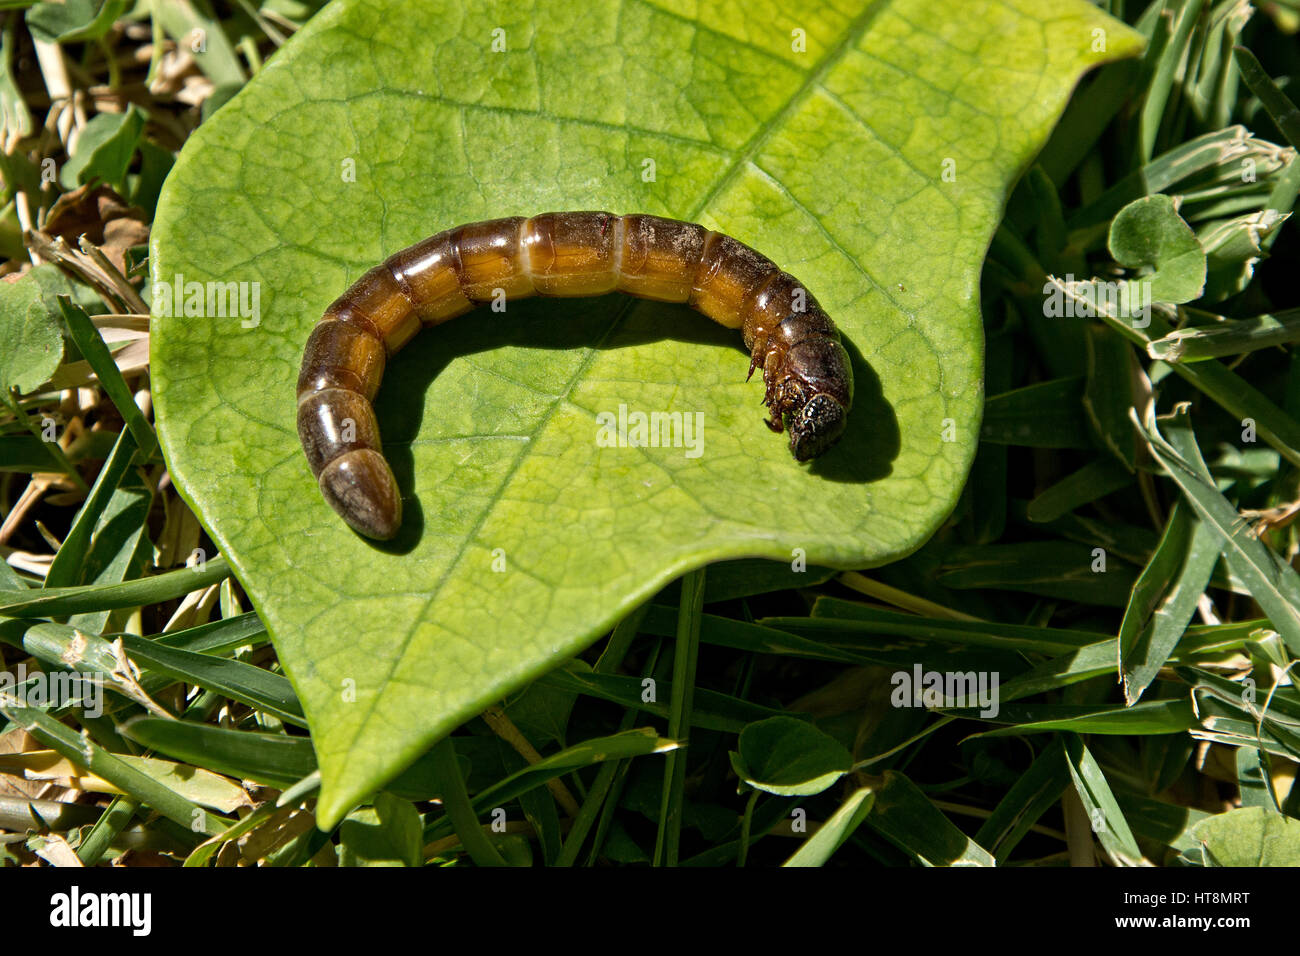 A 3rd Phase Instar Grub (probably beetle) in Namibia. Stock Photo